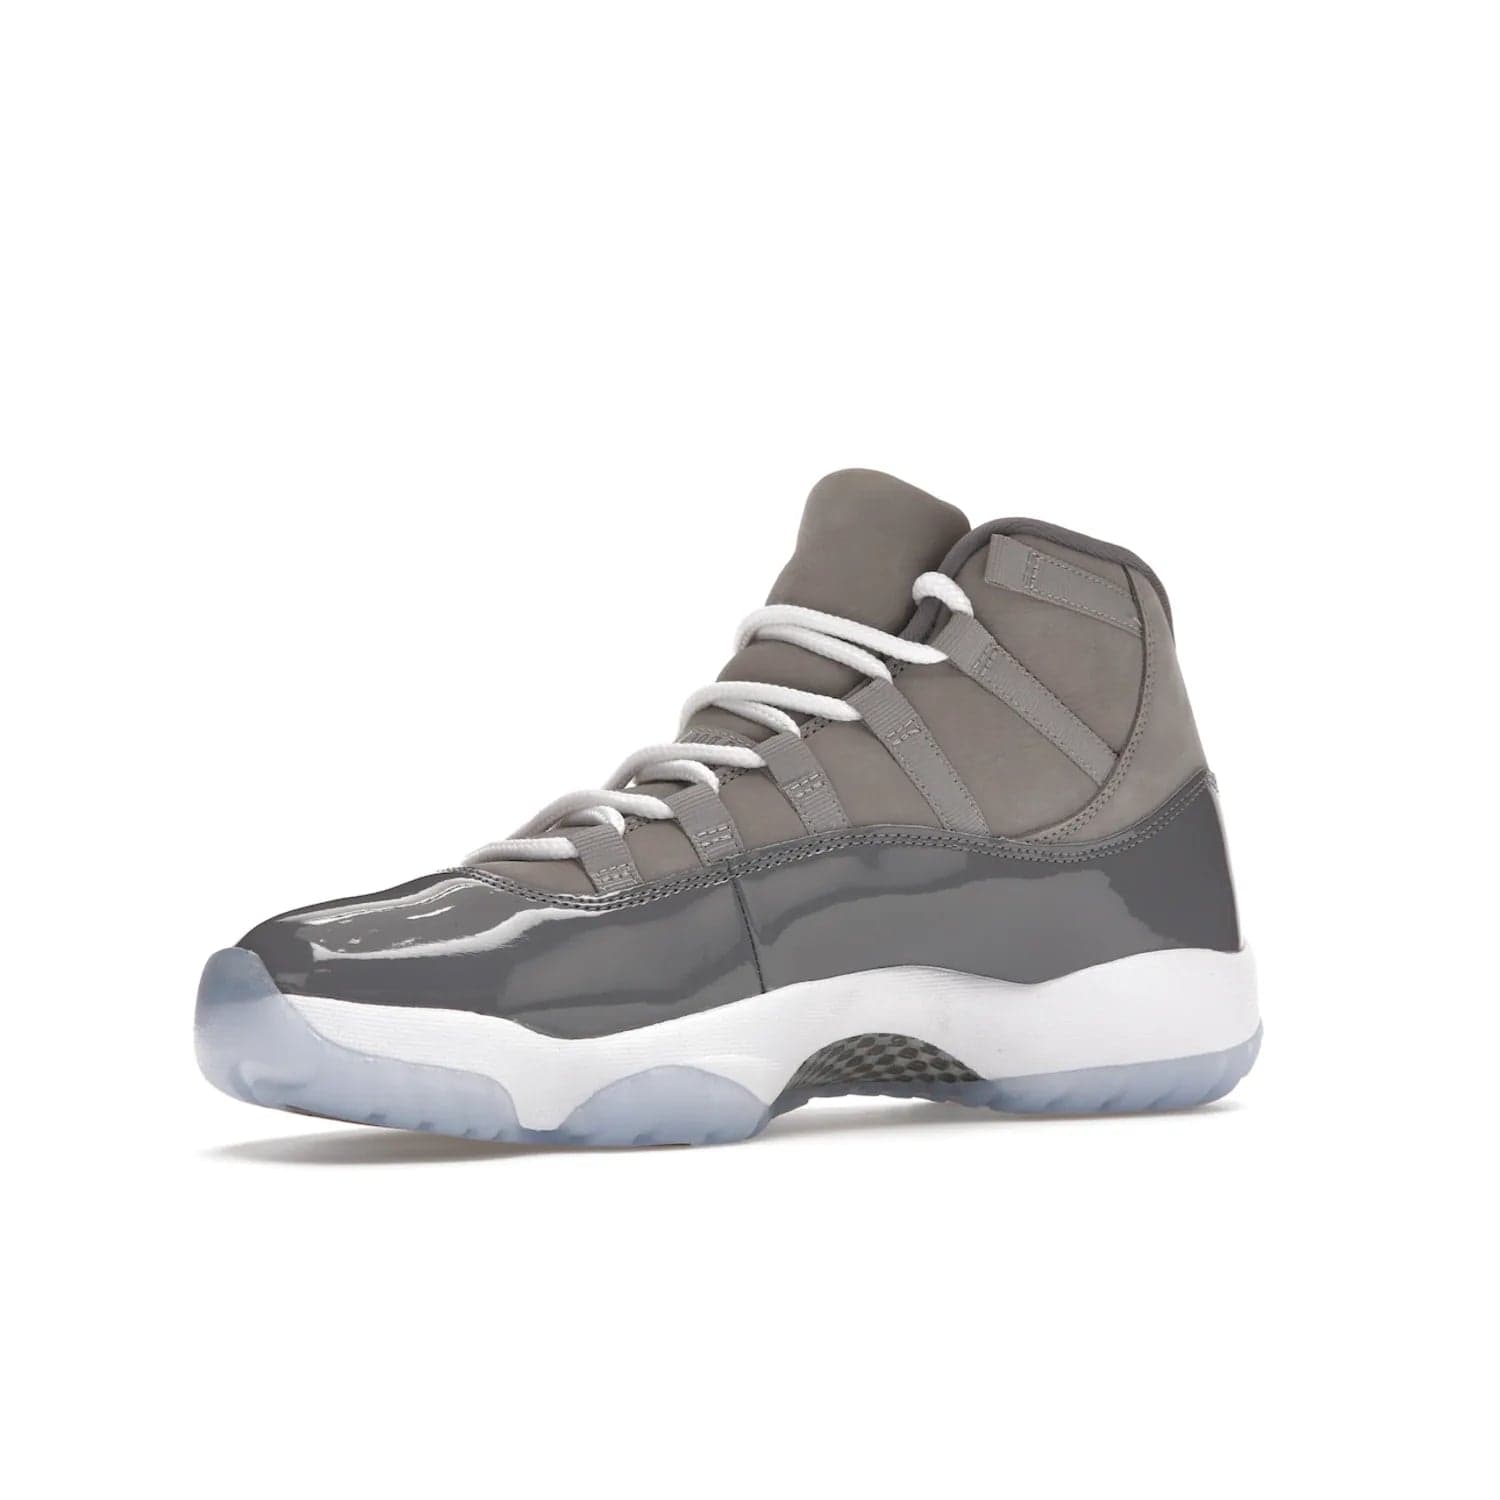 Jordan 11 Retro Cool Grey (2021) - Image 16 - Only at www.BallersClubKickz.com - Shop the Air Jordan 11 Retro Cool Grey (2021) for a must-have sneaker with a Cool Grey Durabuck upper, patent leather overlays, signature Jumpman embroidery, a white midsole, icy blue translucent outsole, and Multi-Color accents.  Released in December 2021 for $225.